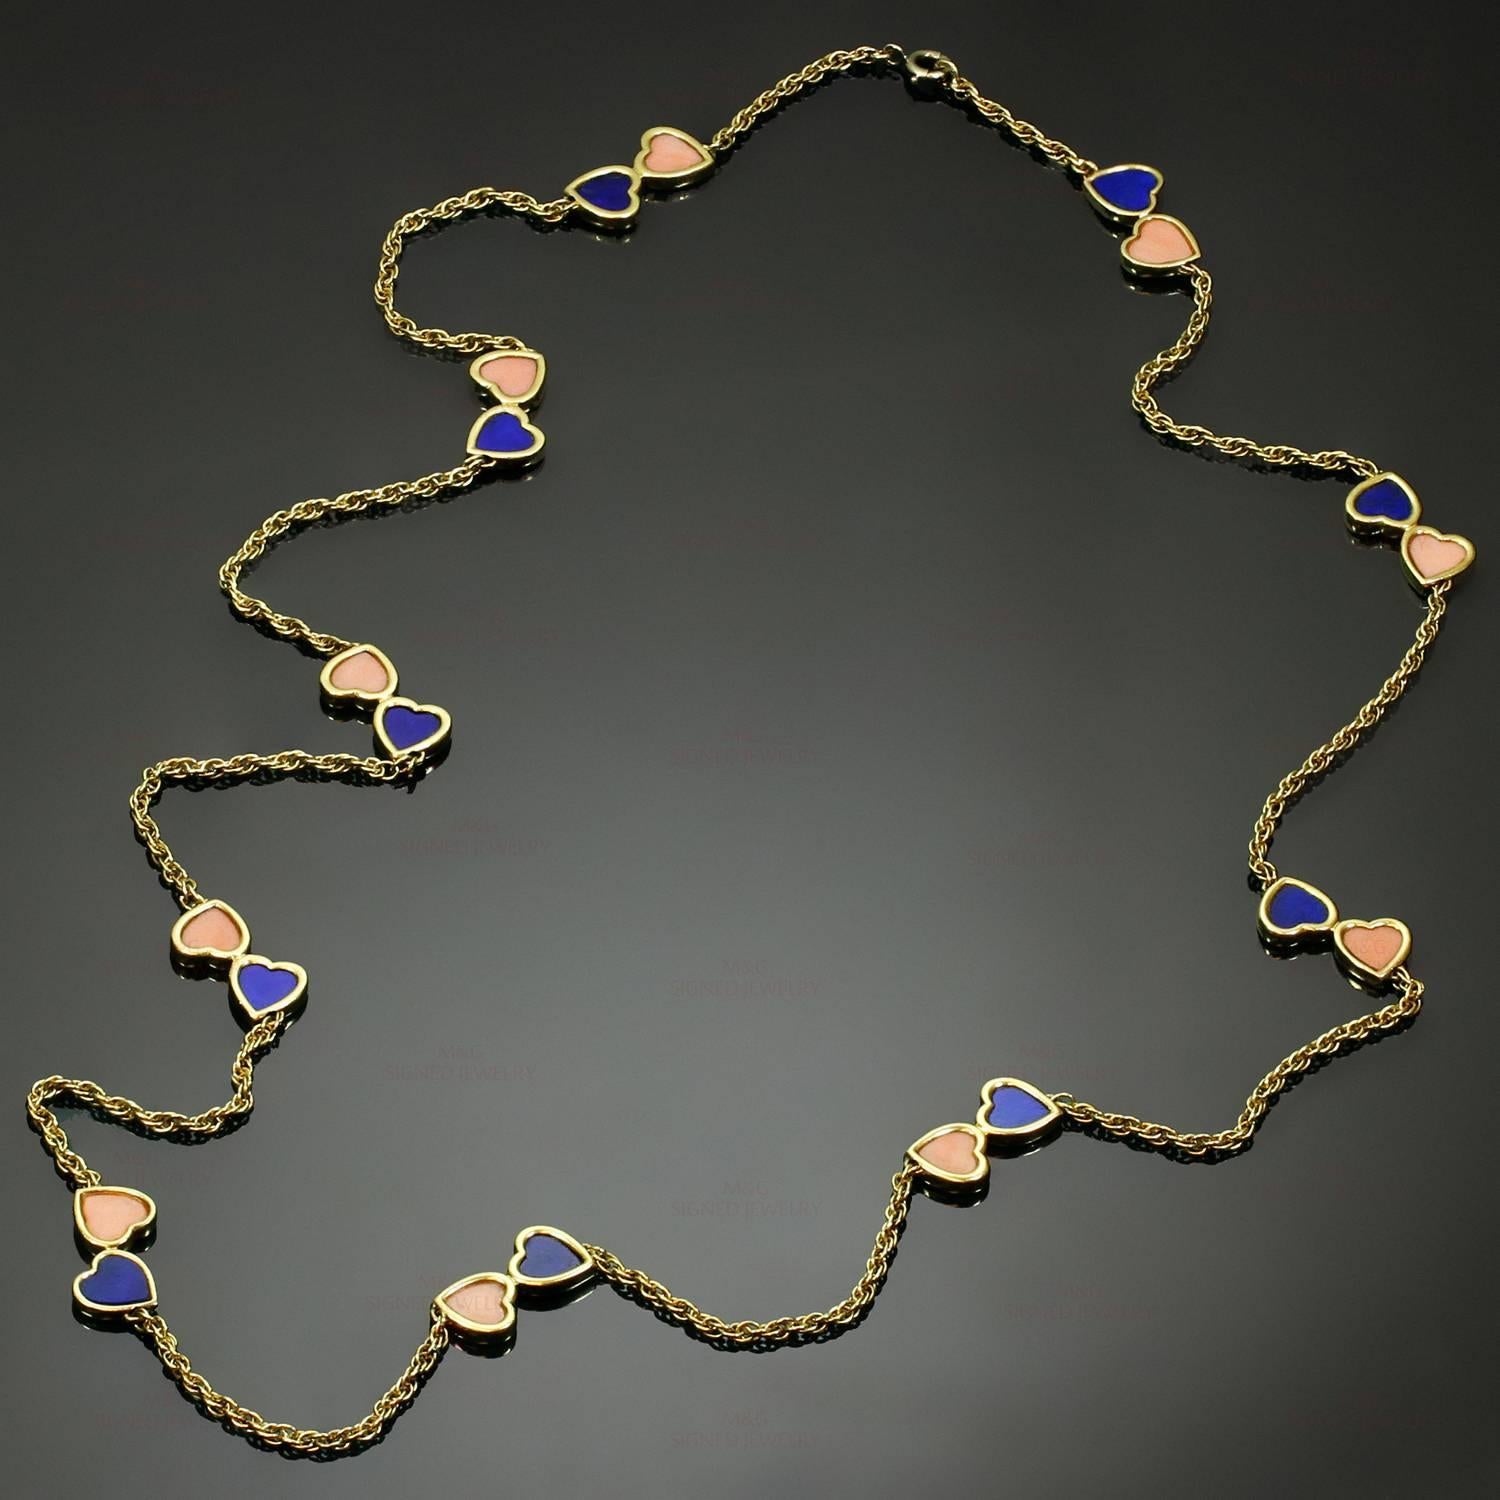 This rare and fabulous Van Cleef & Arpels necklace is crafted in 18k yellow gold and accented with romantic double-heart motifs set with pink coral and lapis lazuli. Made in France circa 1960s. Measurements: 0.38" (10mm) width, 30"